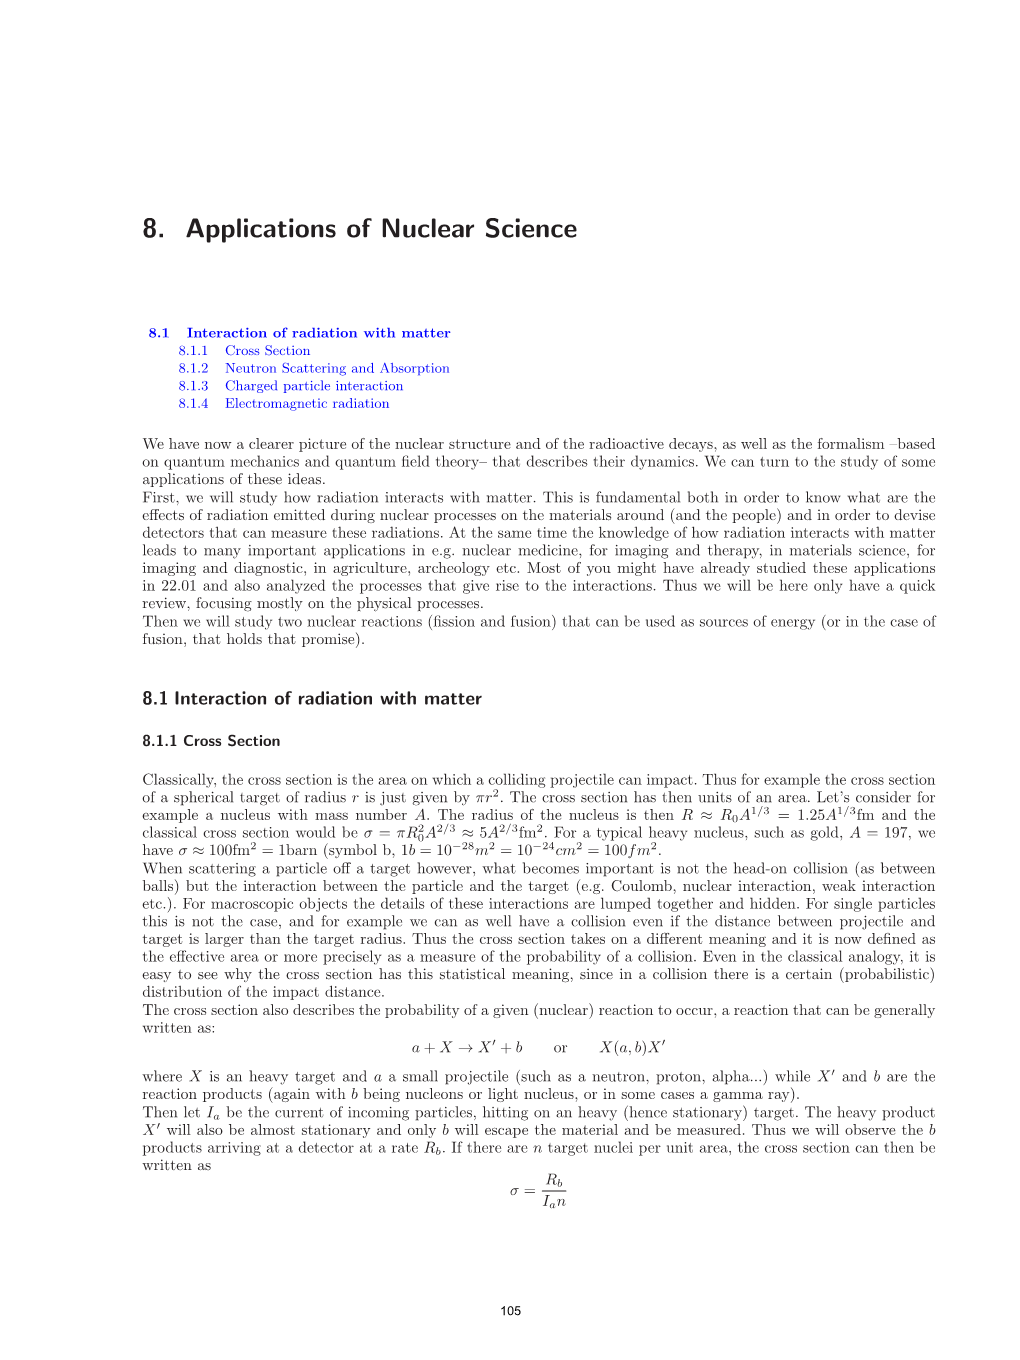 Lecture Notes, Chapter 8. Applications of Nuclear Science